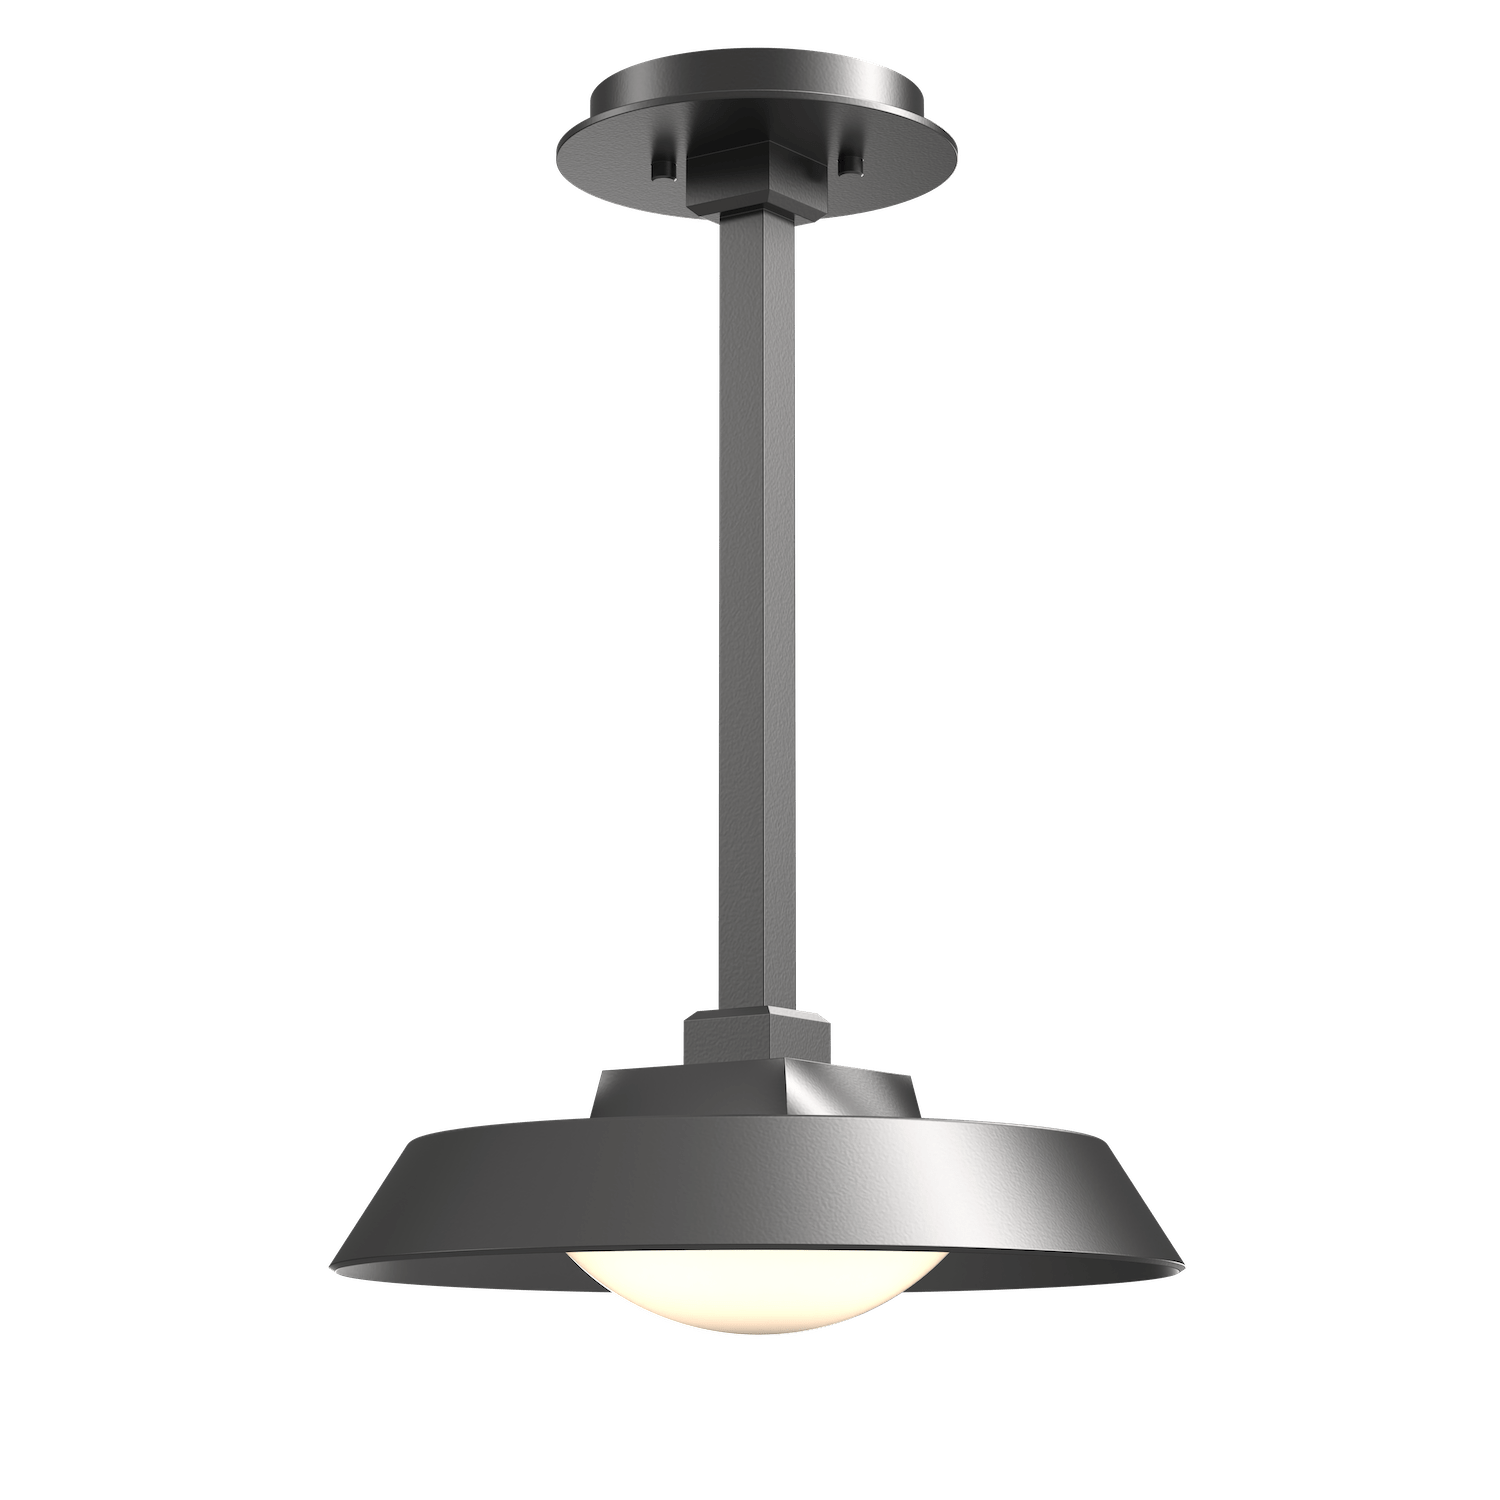 OPB0073-01-AG-O-Hammerton-Studio-Farmhouse-12-inch-outdoor-pendant-light-with-argento-grey-finish-and-frosted-glass-shade-and-LED-lamping